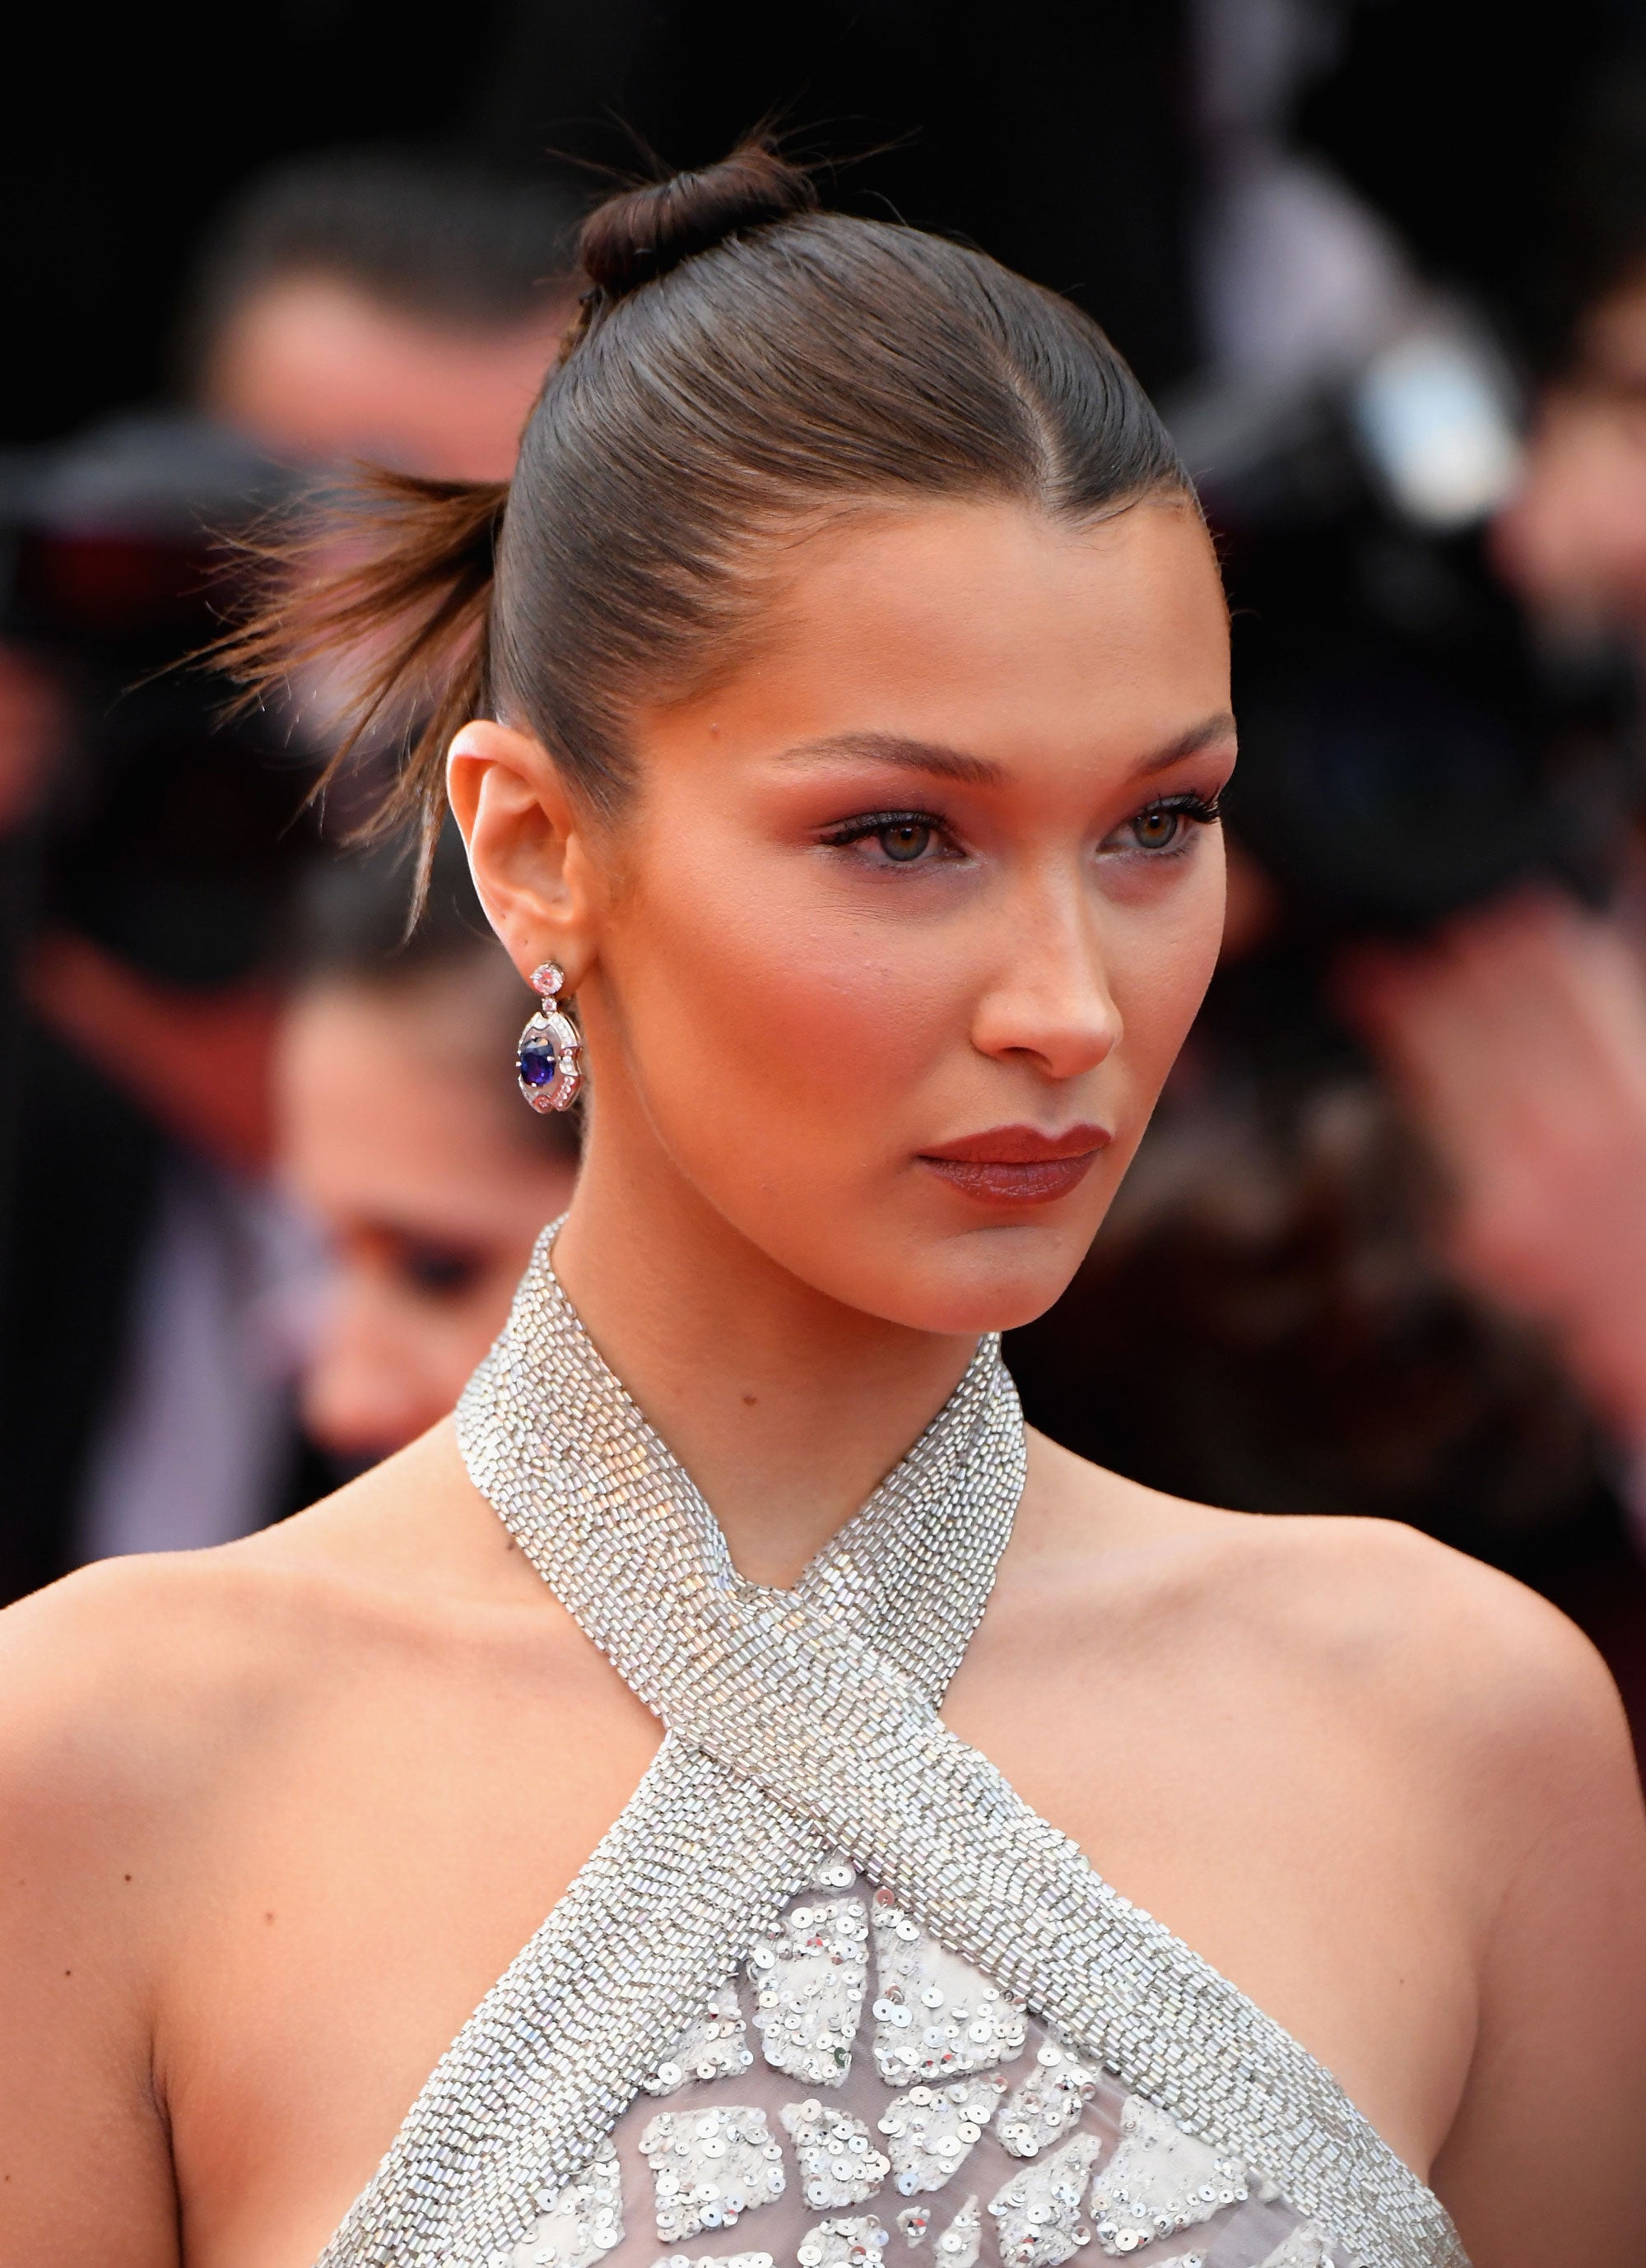 Six Celebrities Rocking The Slicked-Back Hair Trend